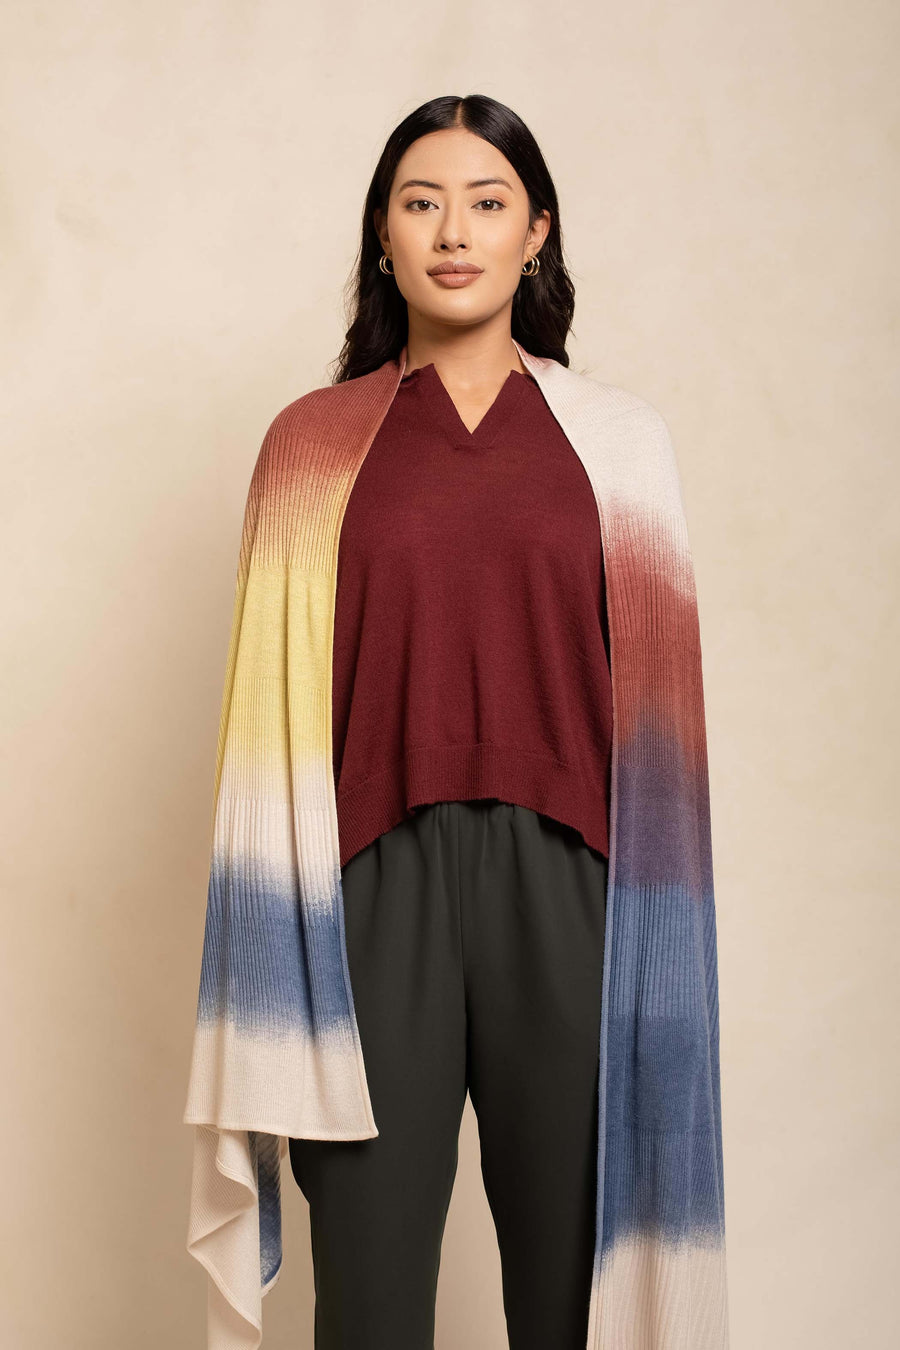 Formal Printed Ombre Stripes Unisex Scarf